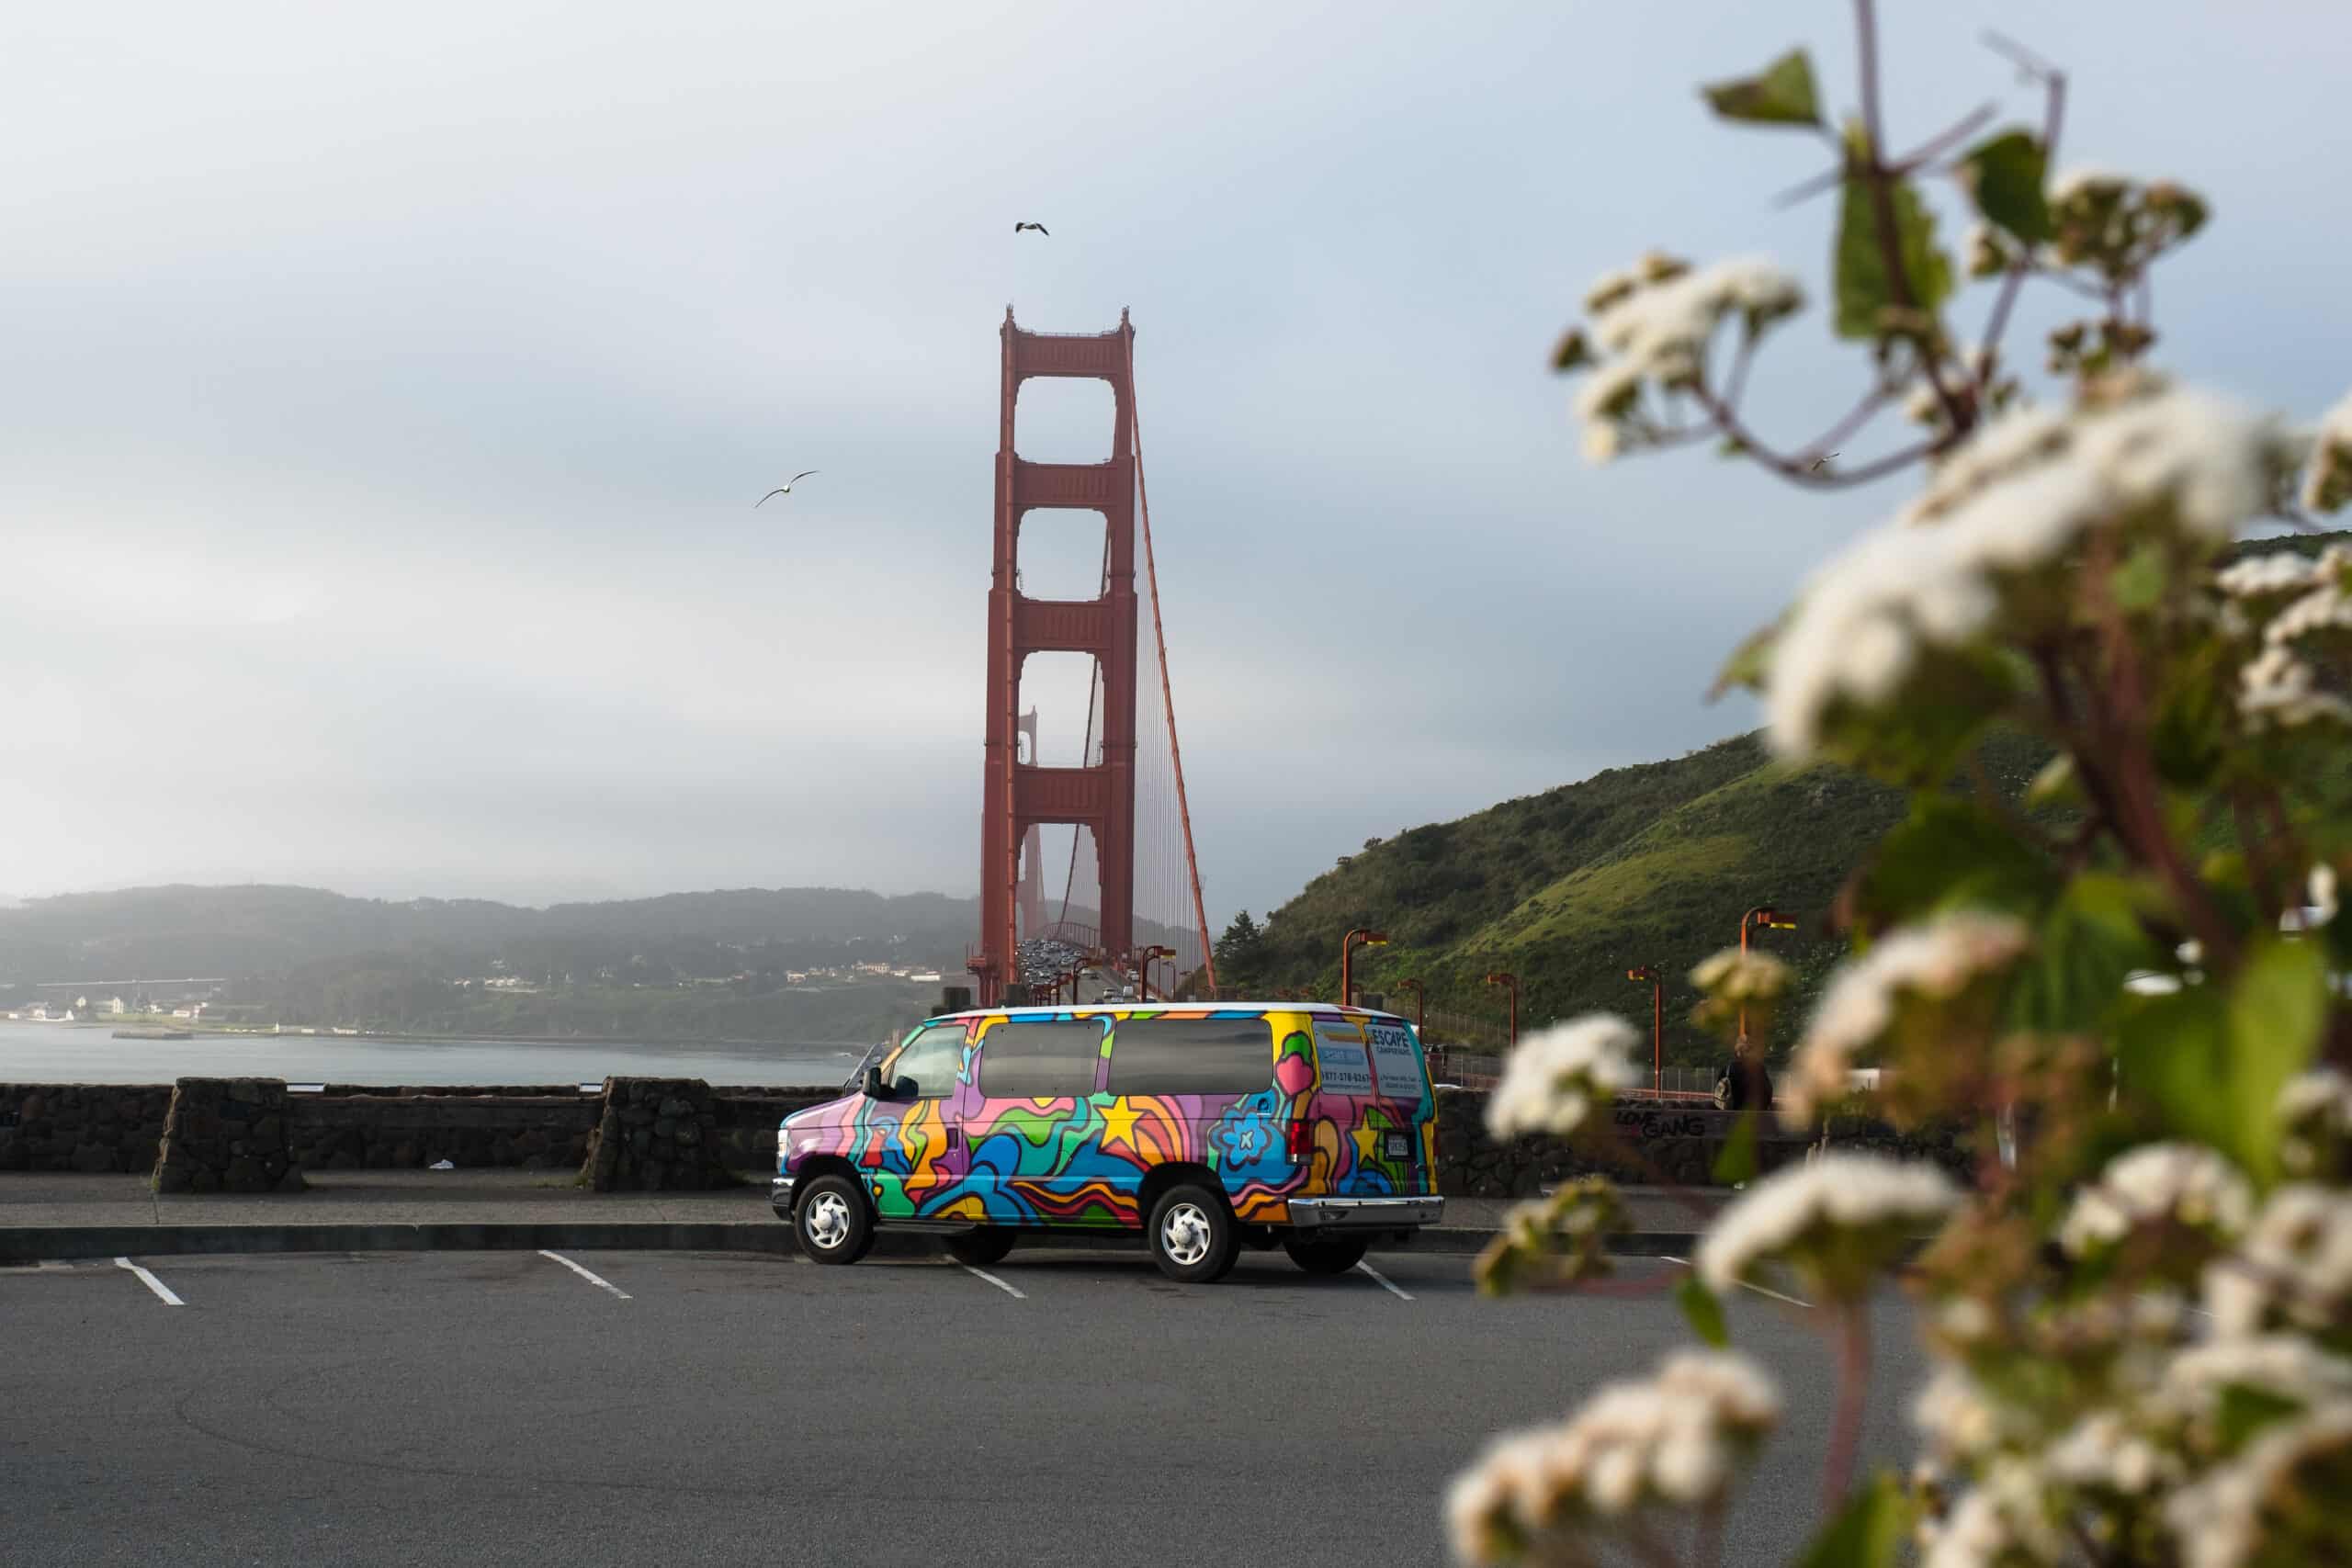 Take a rest in San Francisco to see the Golden Gate Bridge on your drive.